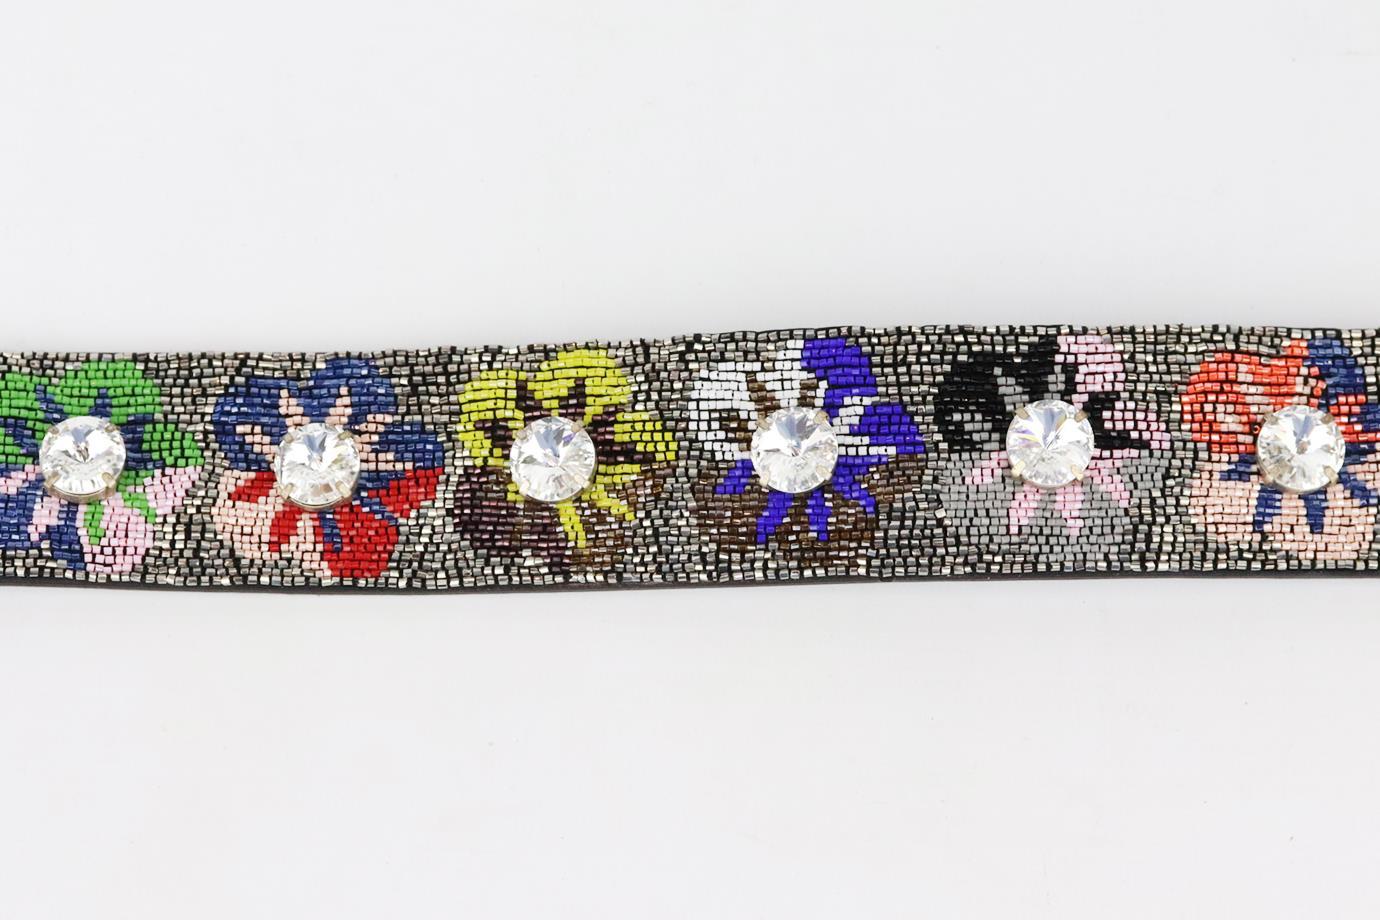 Fendi embellished leather bag strap. Made from multicoloured bead-embellishment in a floral-print and crystals and gold-tone clasps. L: 35 in. W: 1.5 in